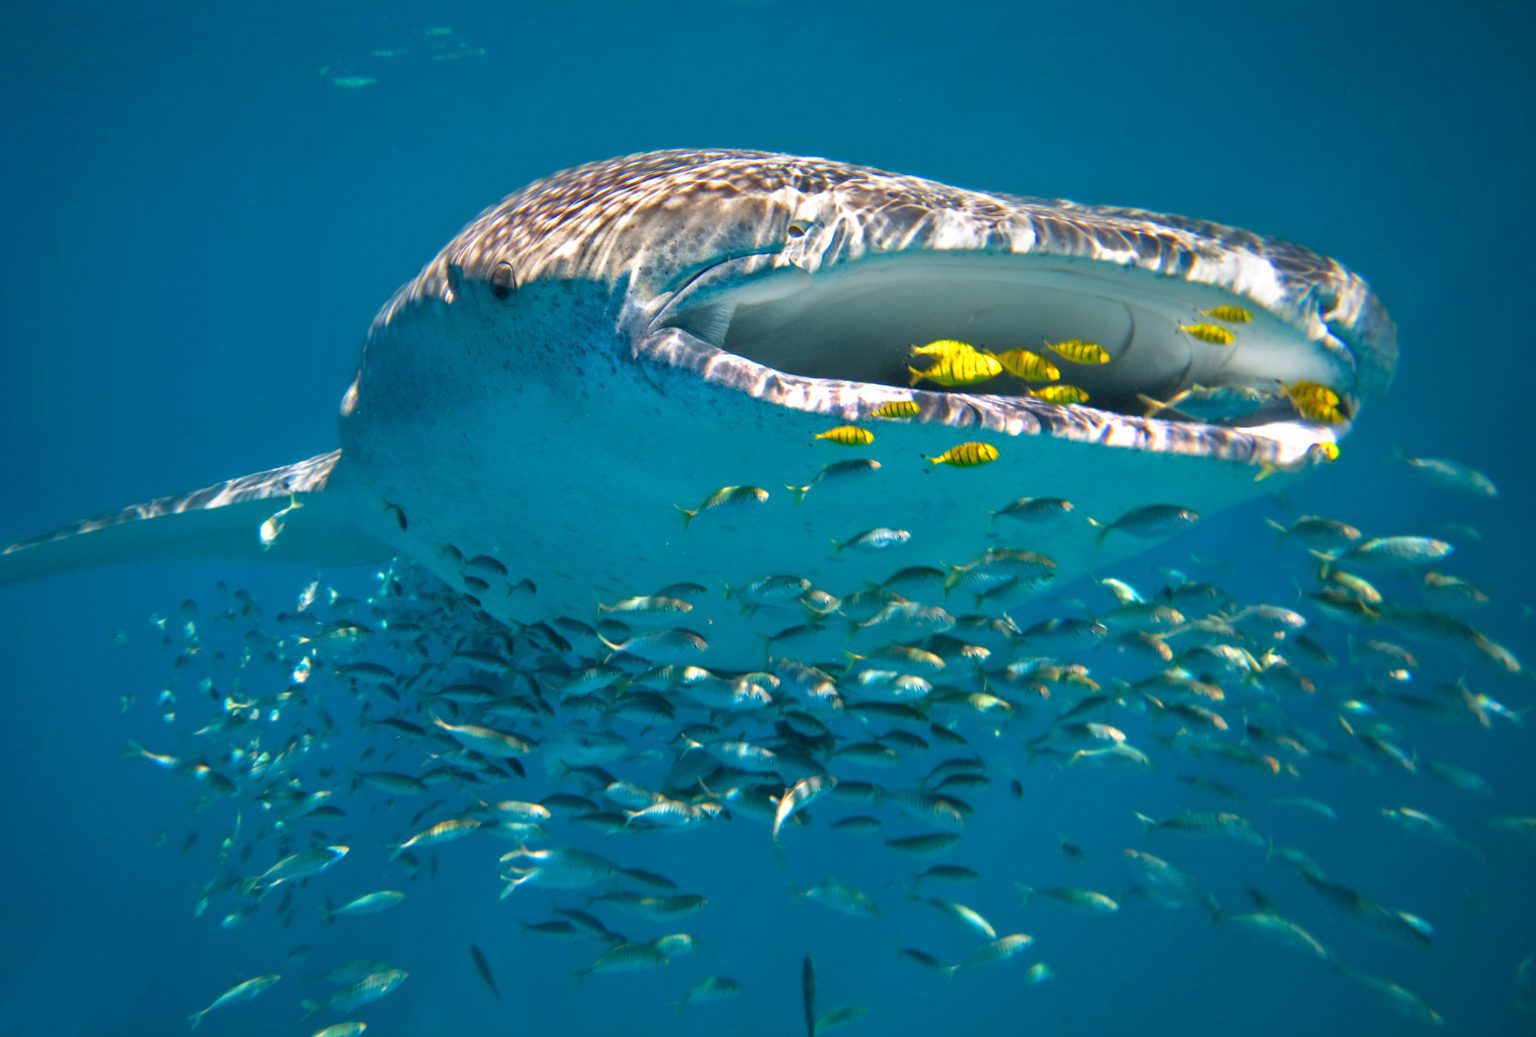 A whale shark gliding through the water and feeding on fish in Ningaloo Reef